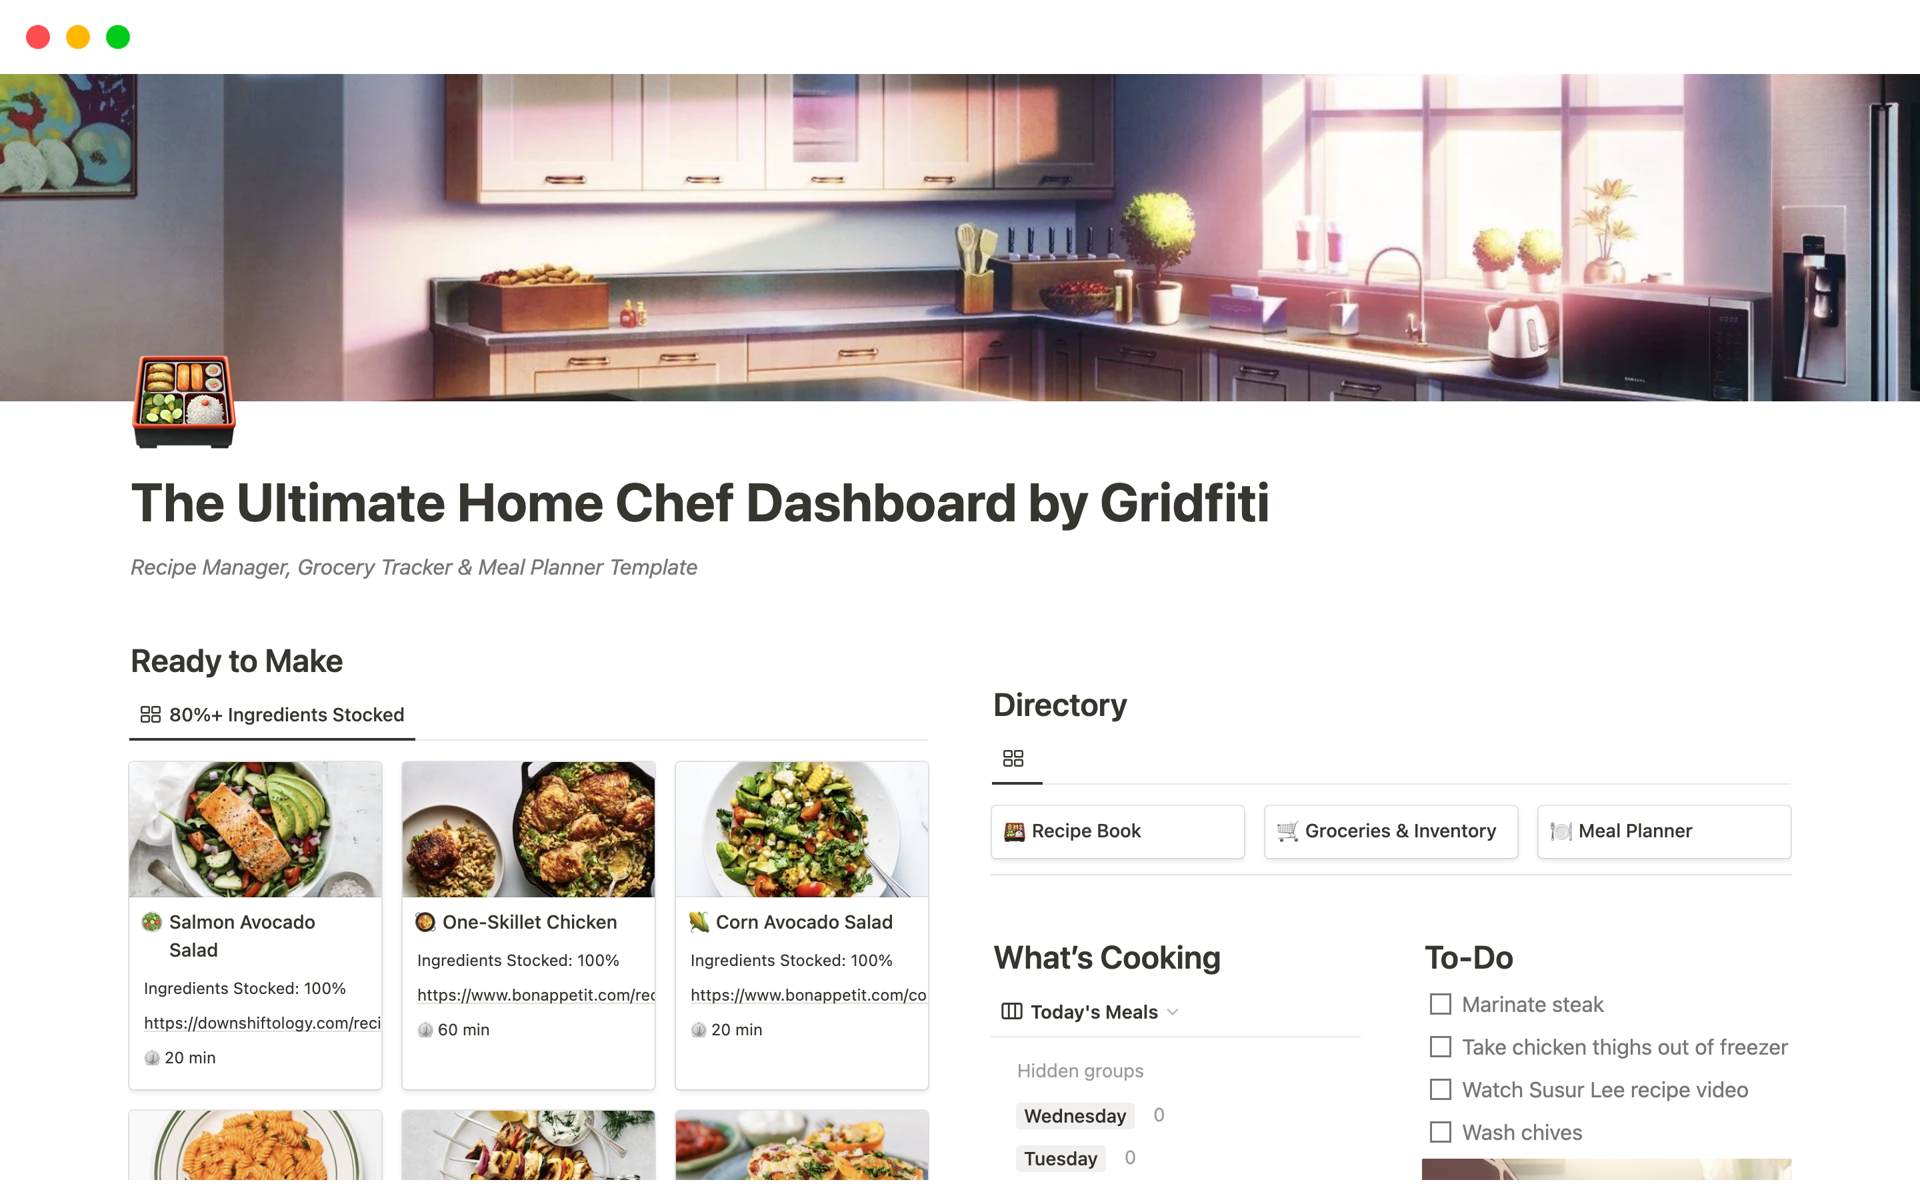 Make home cooking more fun with this all-in-one Notion meal prep & meal planner dashboard with a grocery list, cookbook, and food journal included!